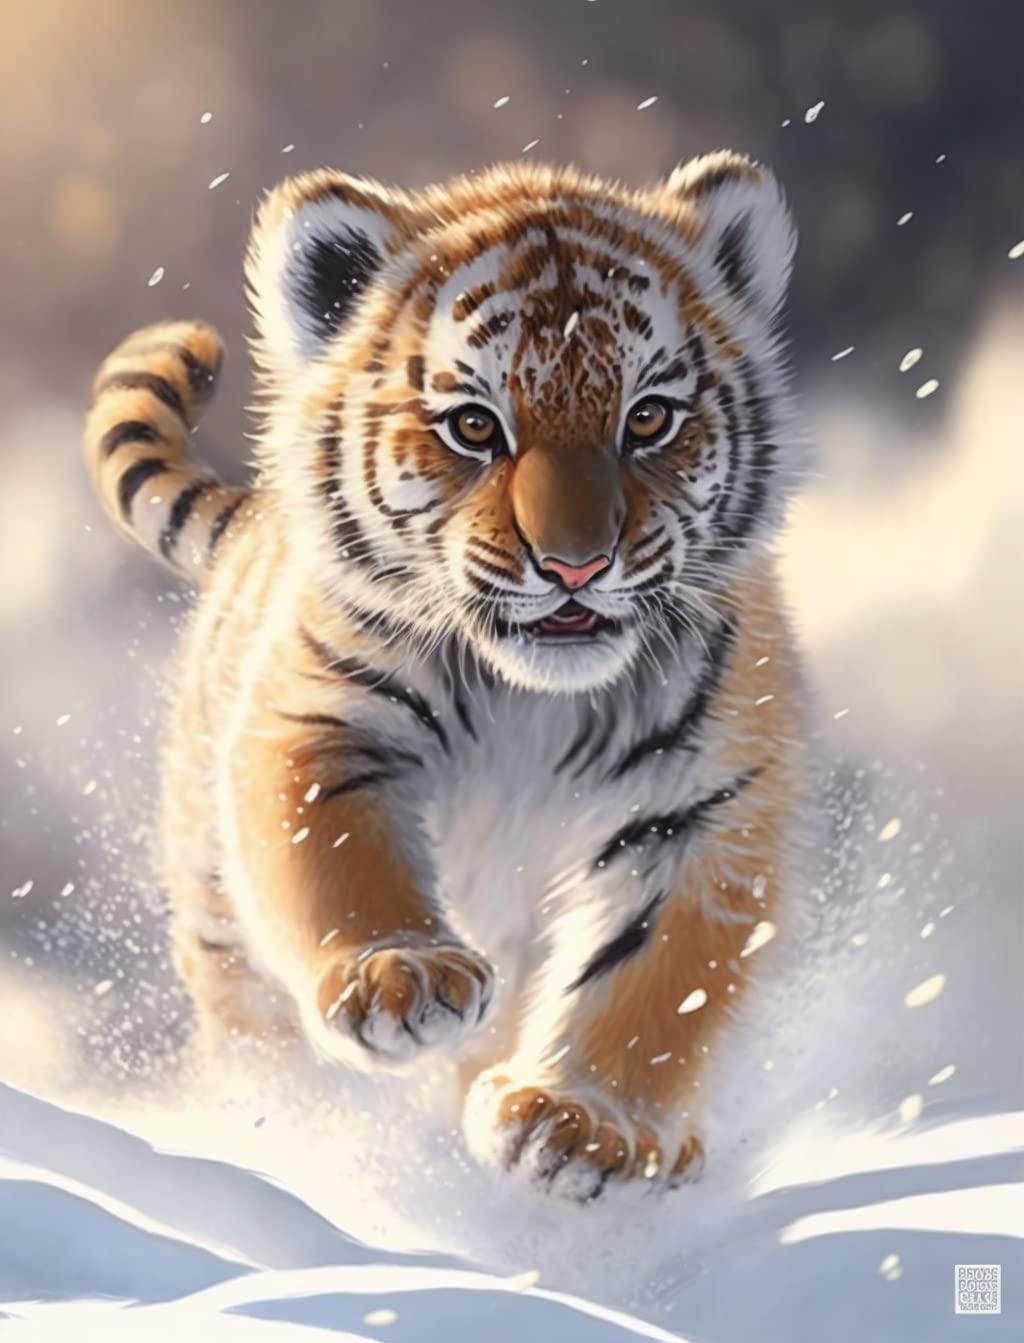 Amazon Pieces Jigsaw Puzzles For Adults Tiger Running In